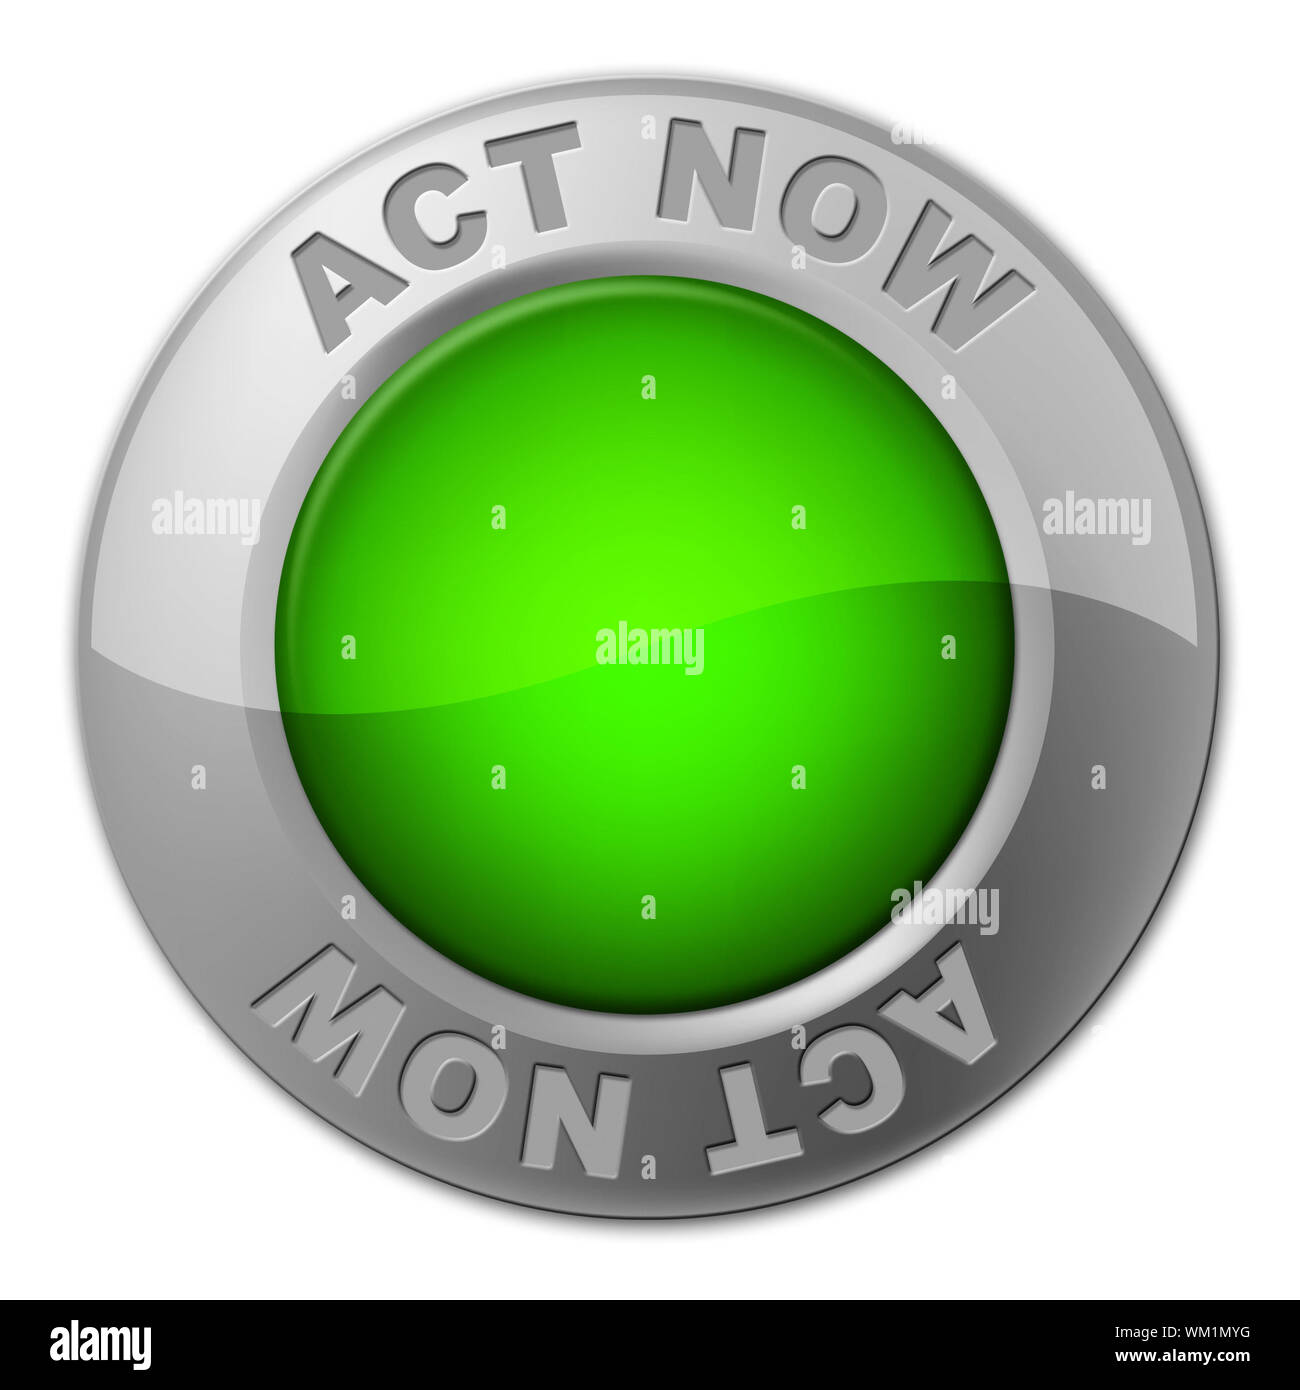 Act Now Button Representing At The Moment And Action Stock Photo